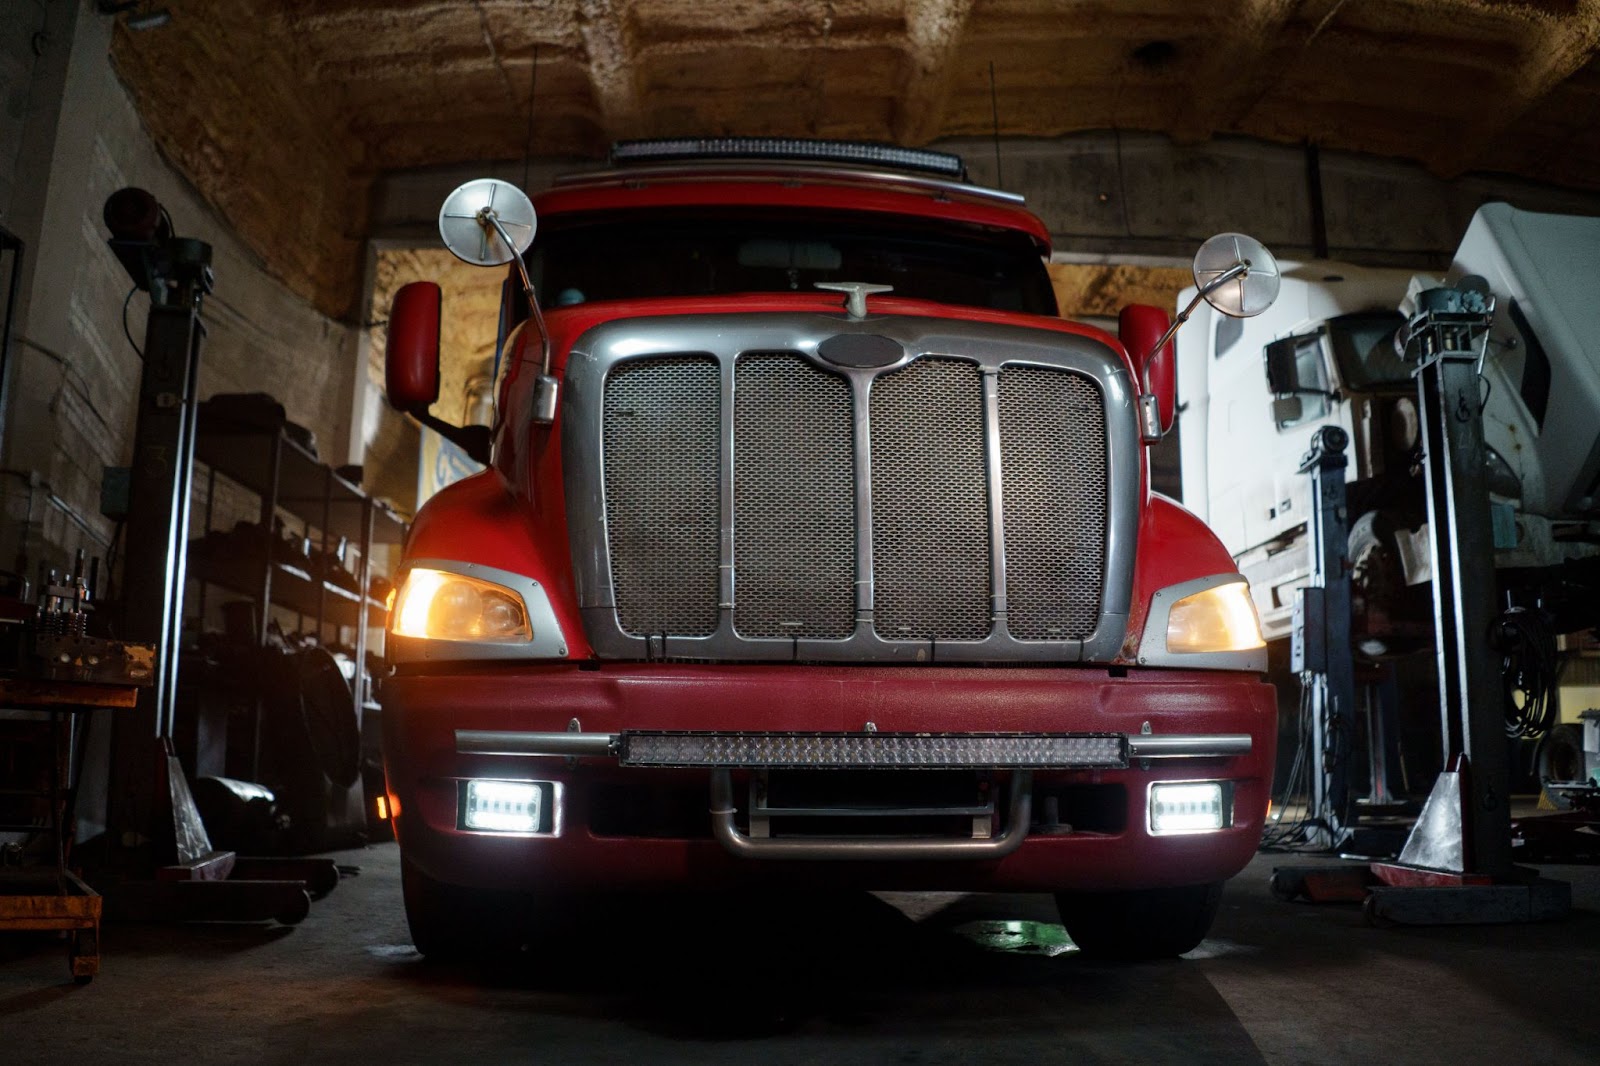 A fish-bowl-style photo of a red semi truck in a repair shop